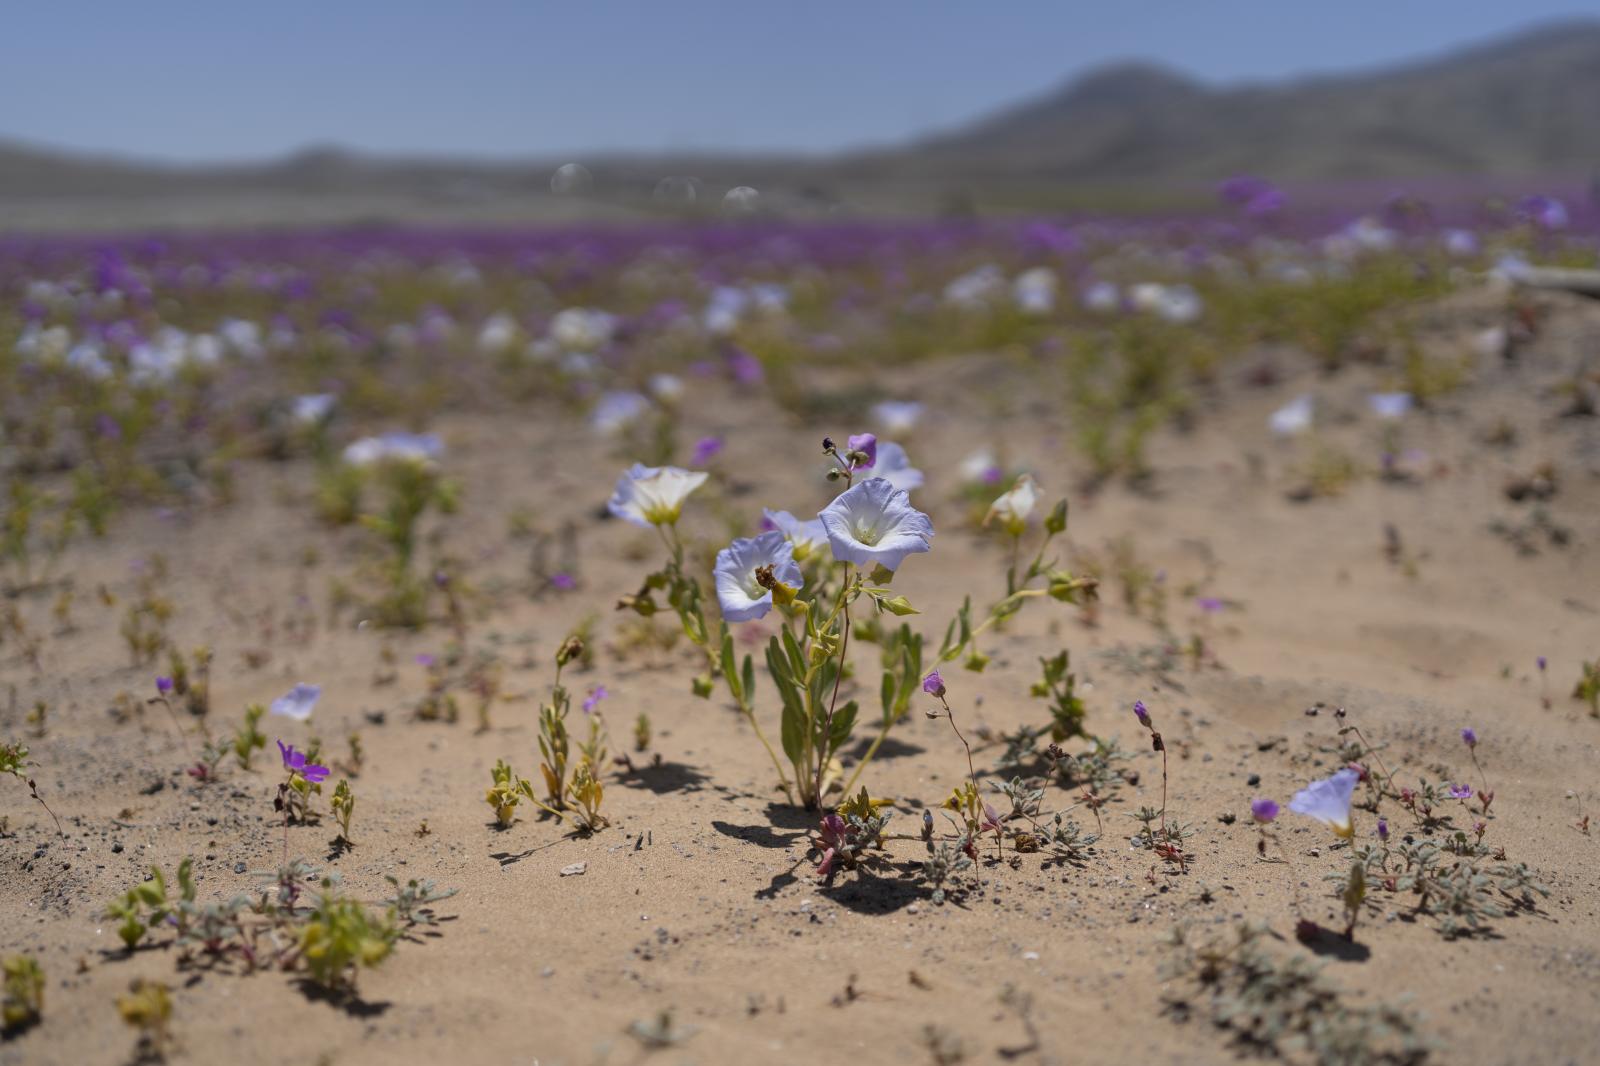 The Guardian: How a desert bloomed in the driest place on Earth